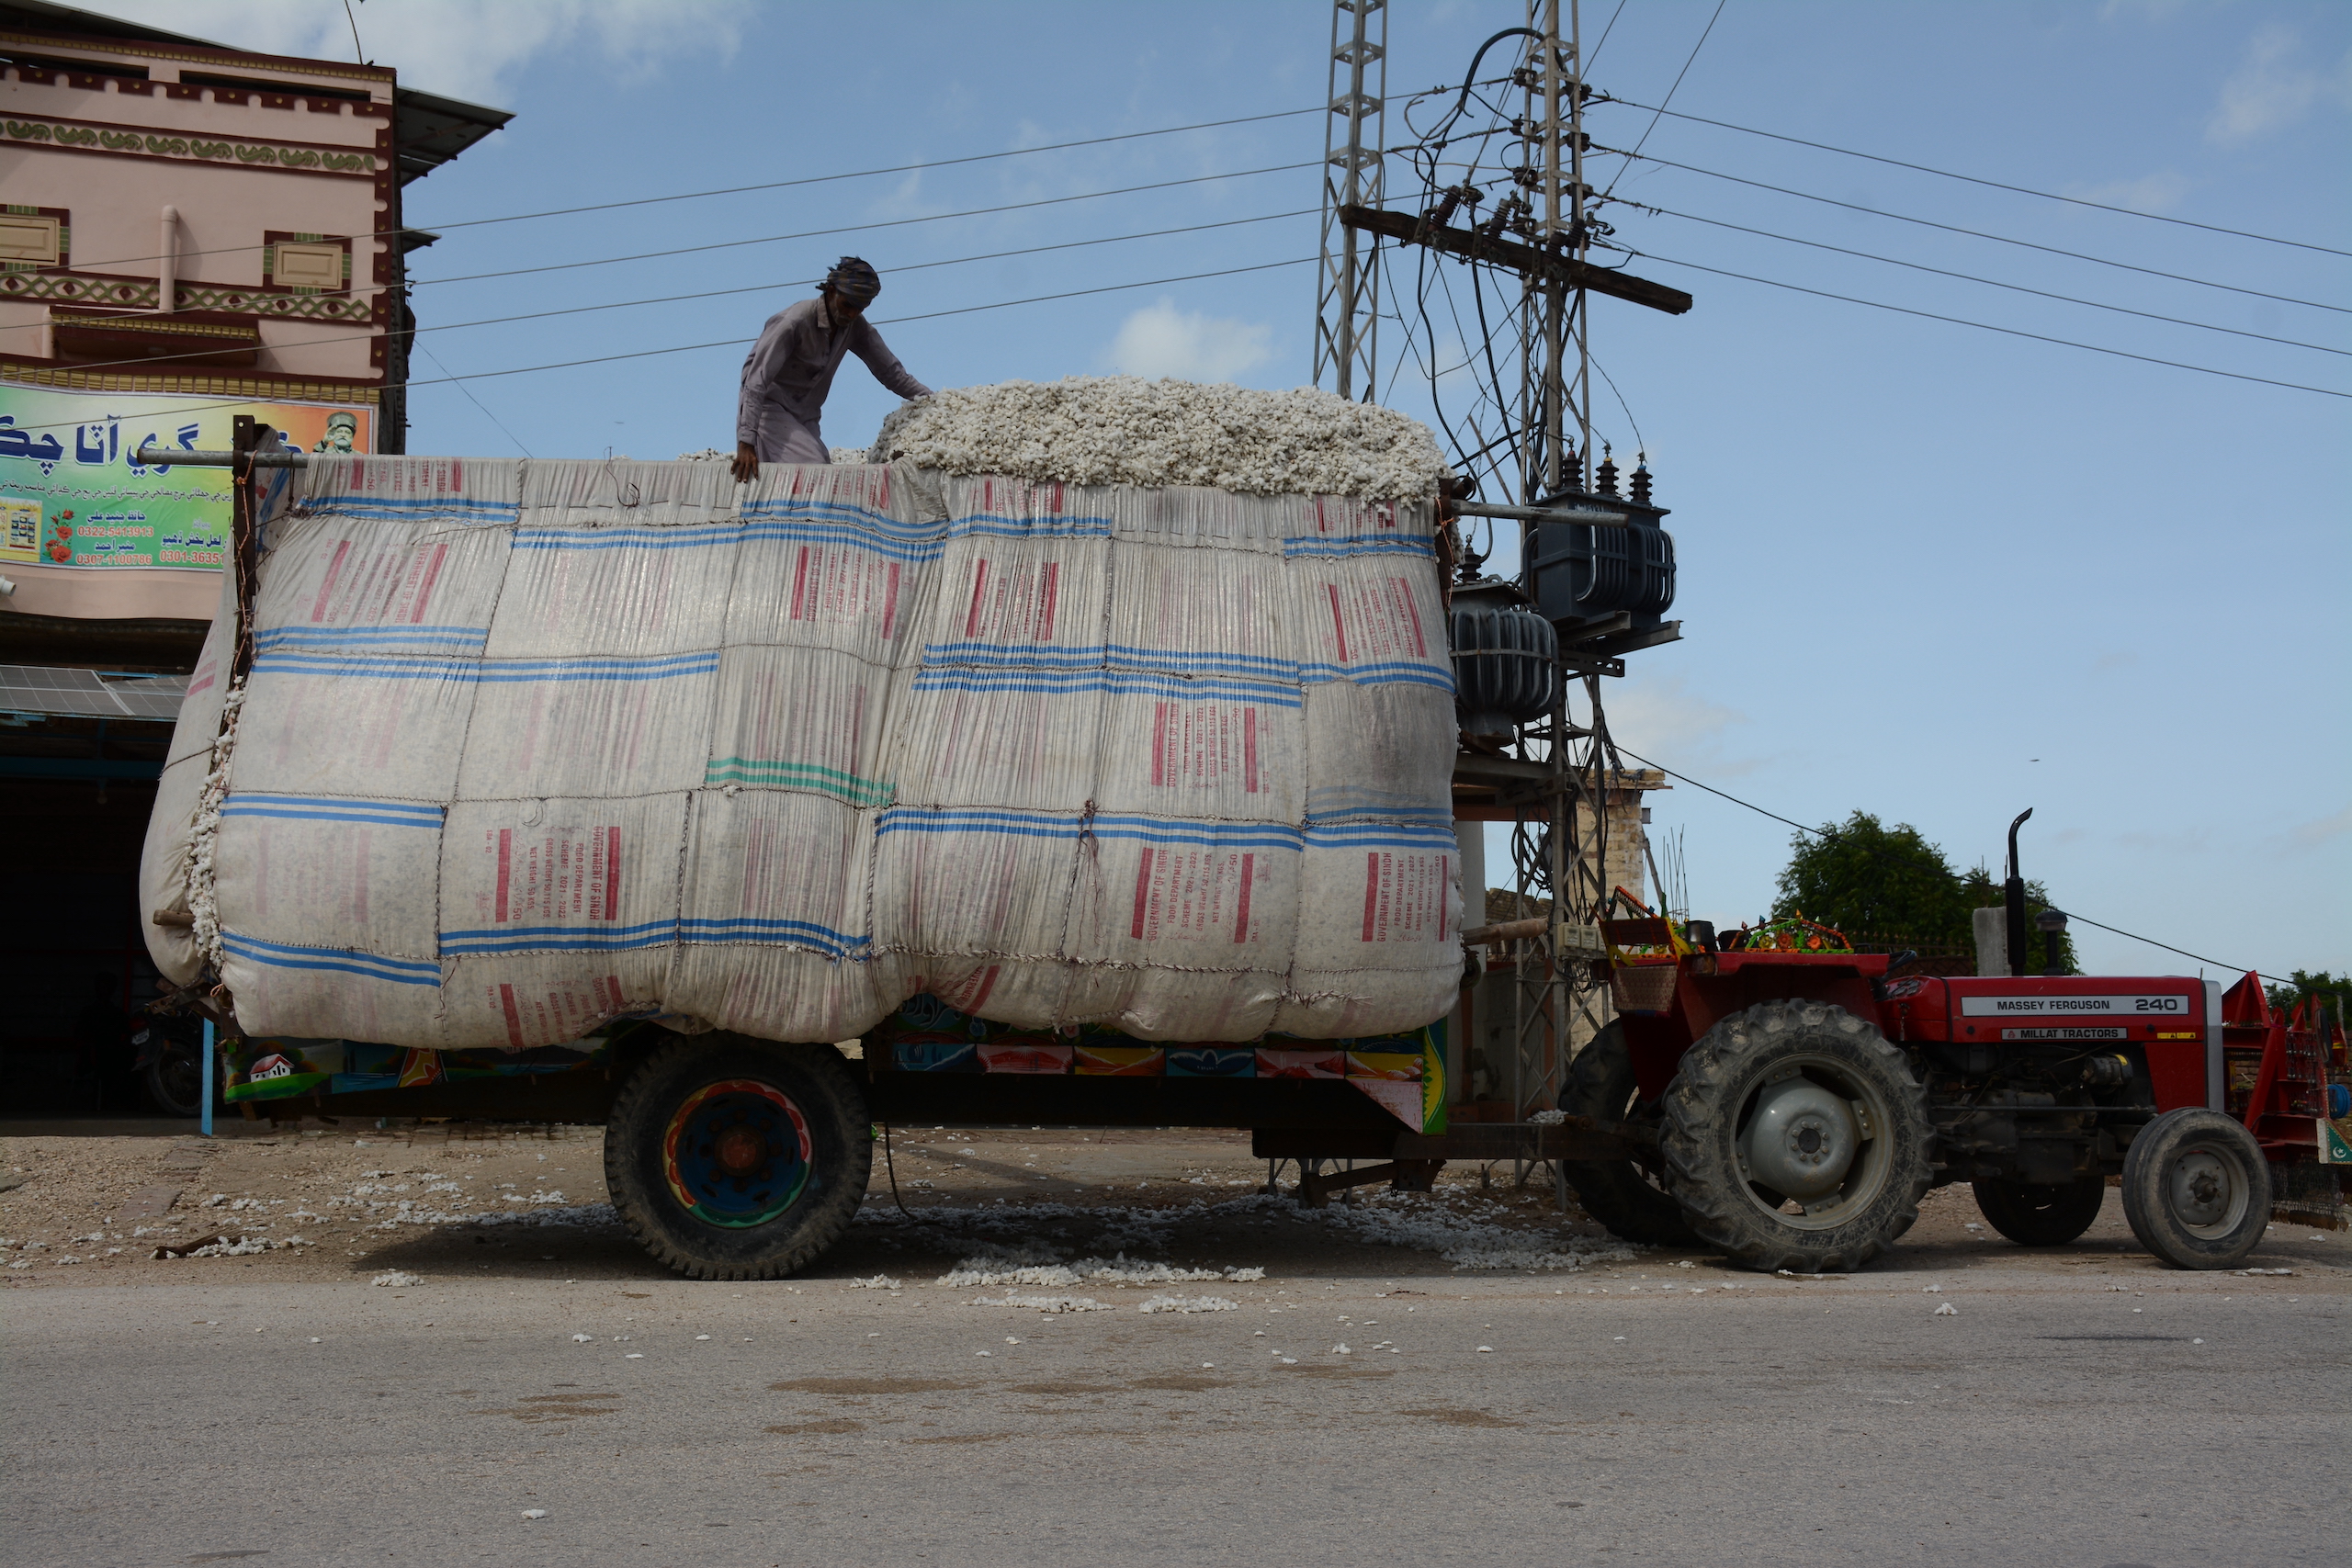 <p>A worker loads raw cotton onto a truck in Sindh’s Sanghar district in July 2022. So far, 45% of the monsoon season’s cotton crop has been lost in the southeastern province of Pakistan. (Image: Zulfiqar Kunbhar)</p>